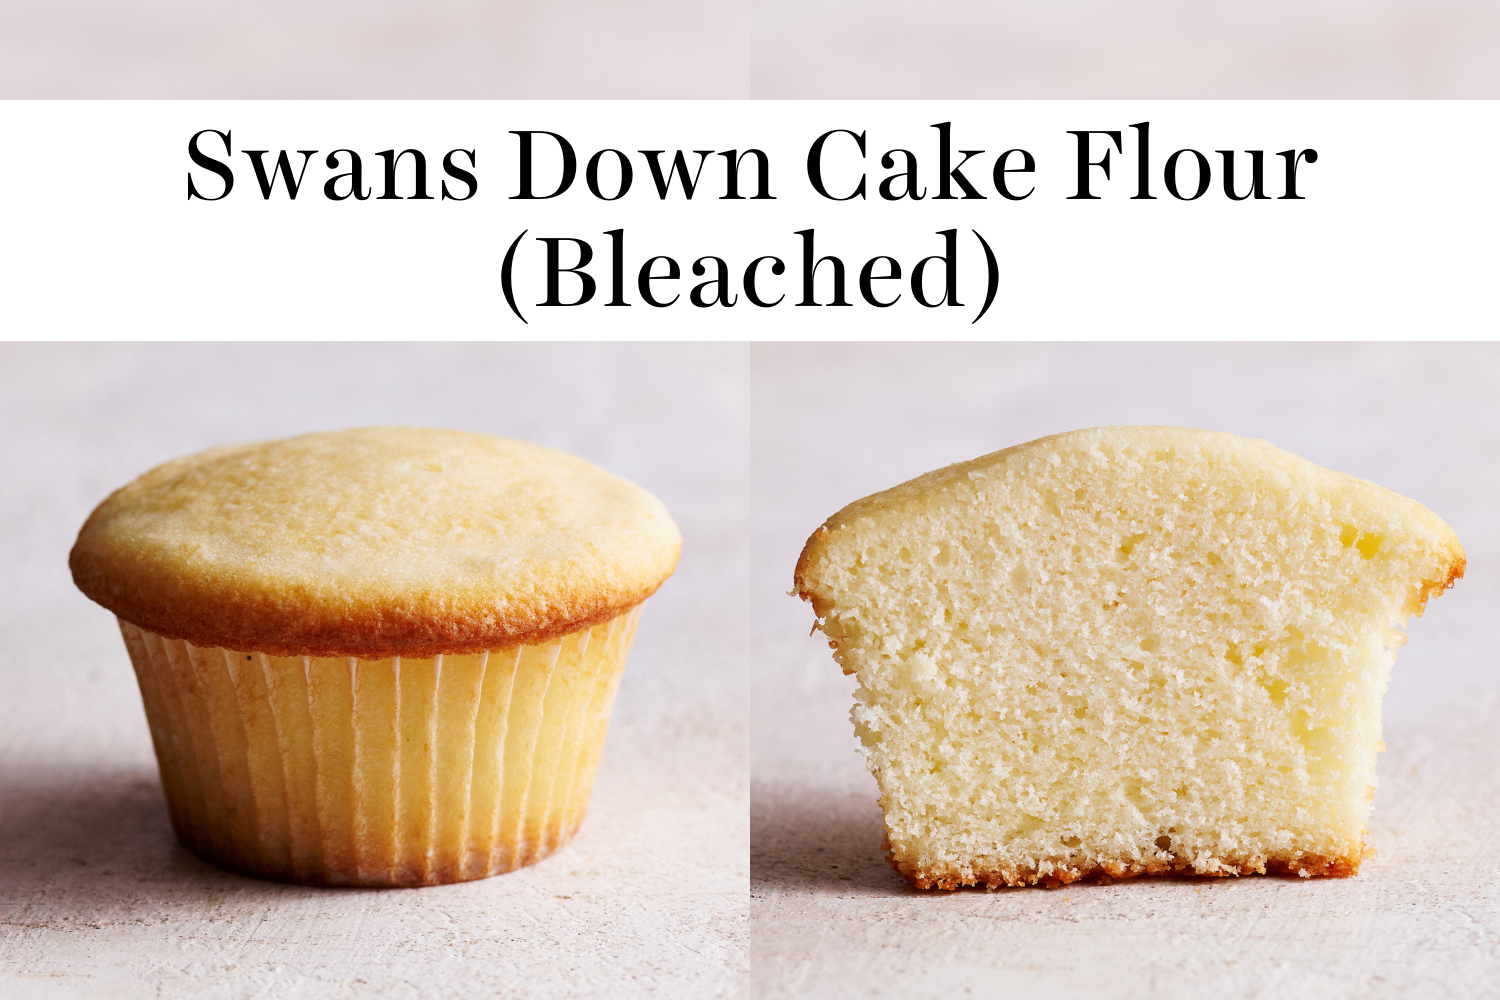 cupcakes made with Swans Down cake flour.